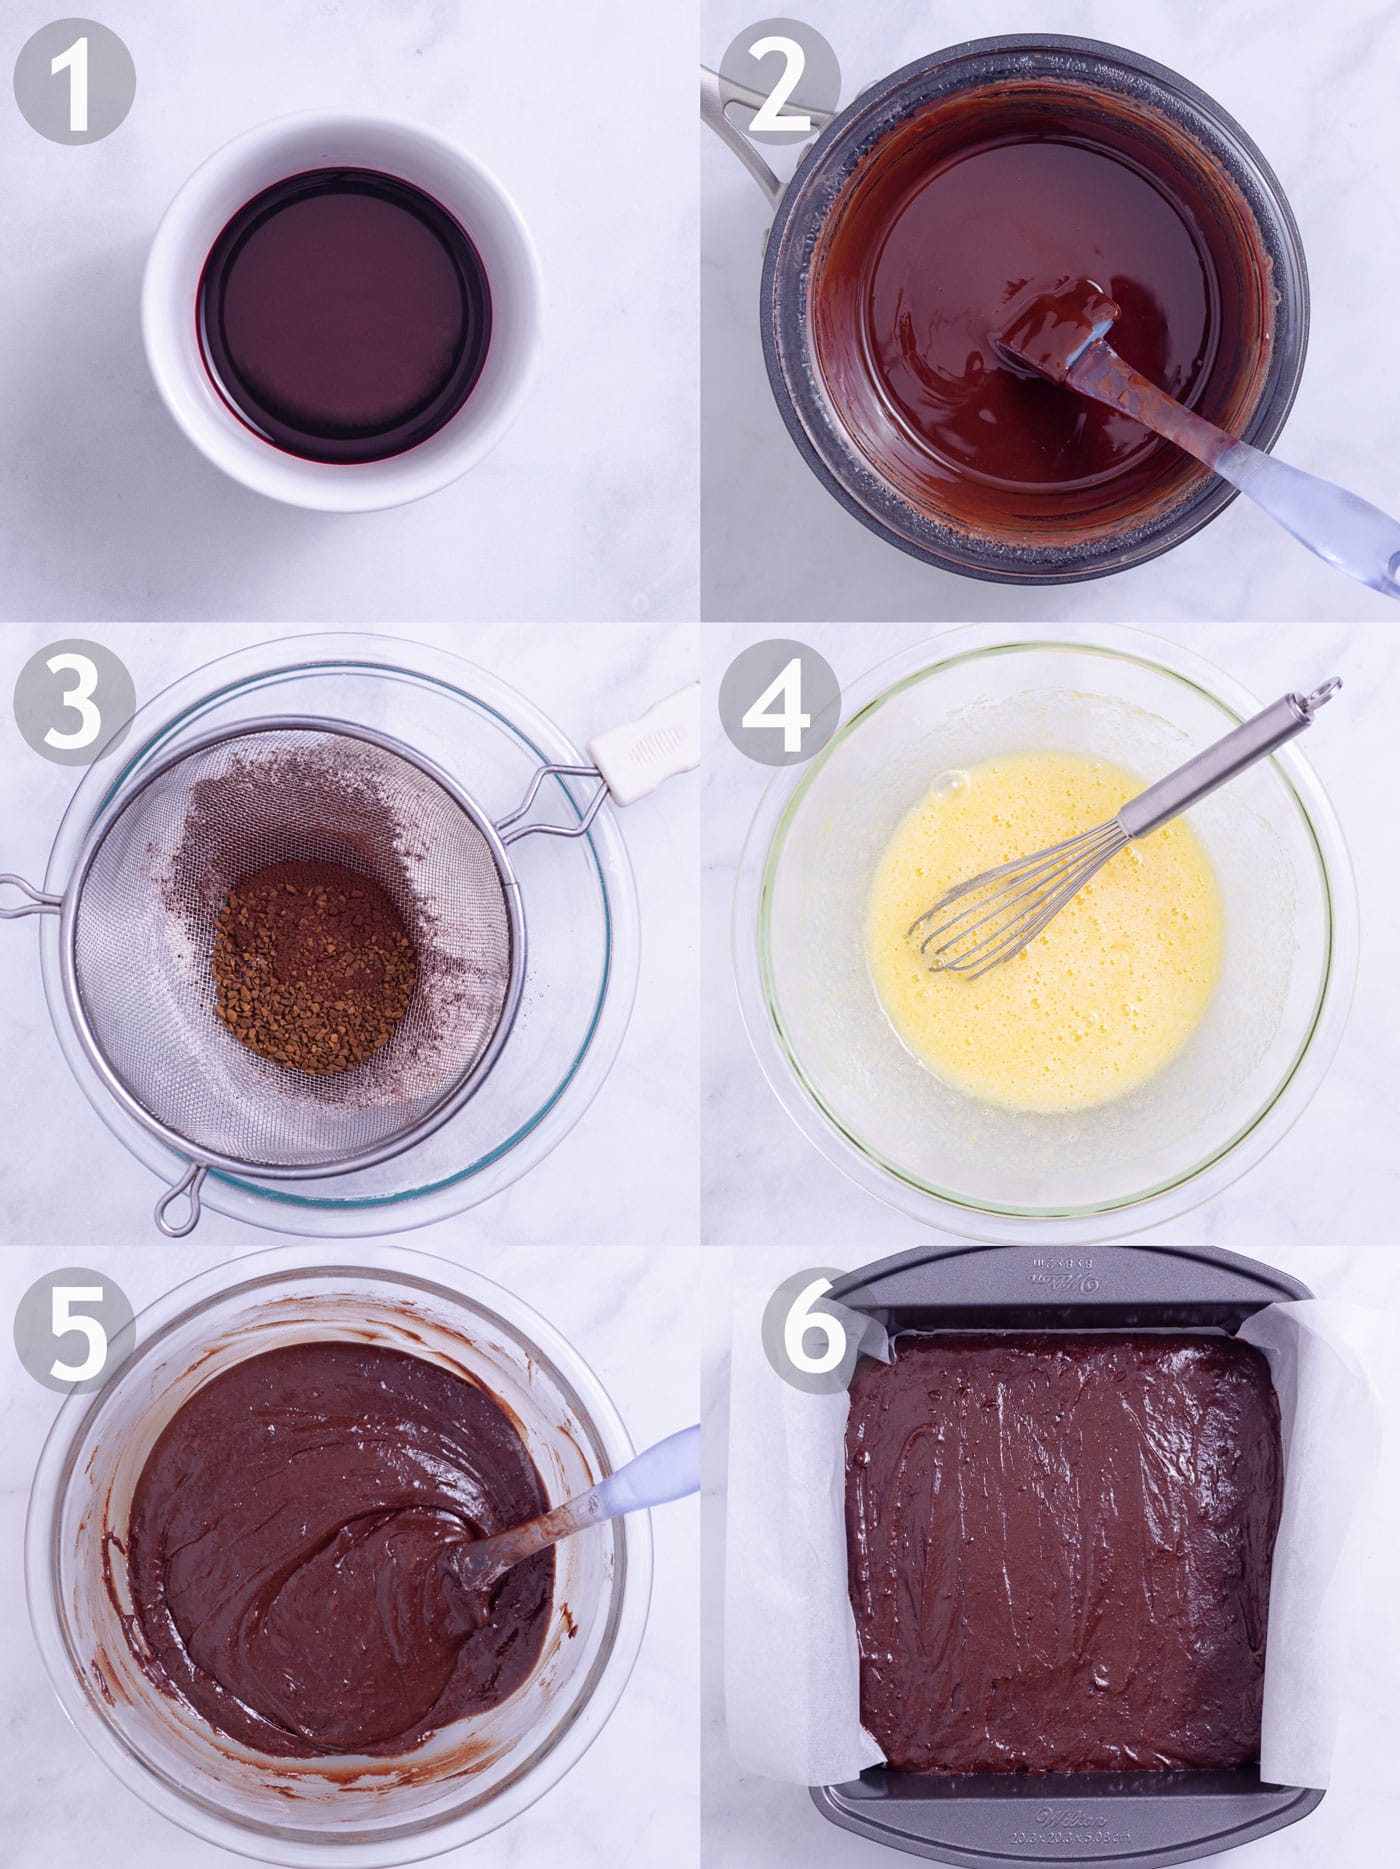 Step by step photos of making brownies with red wine: reduce wine, melt chocolate with butter, mix dry ingredients, mix wet ingredients, combine everything and bake.